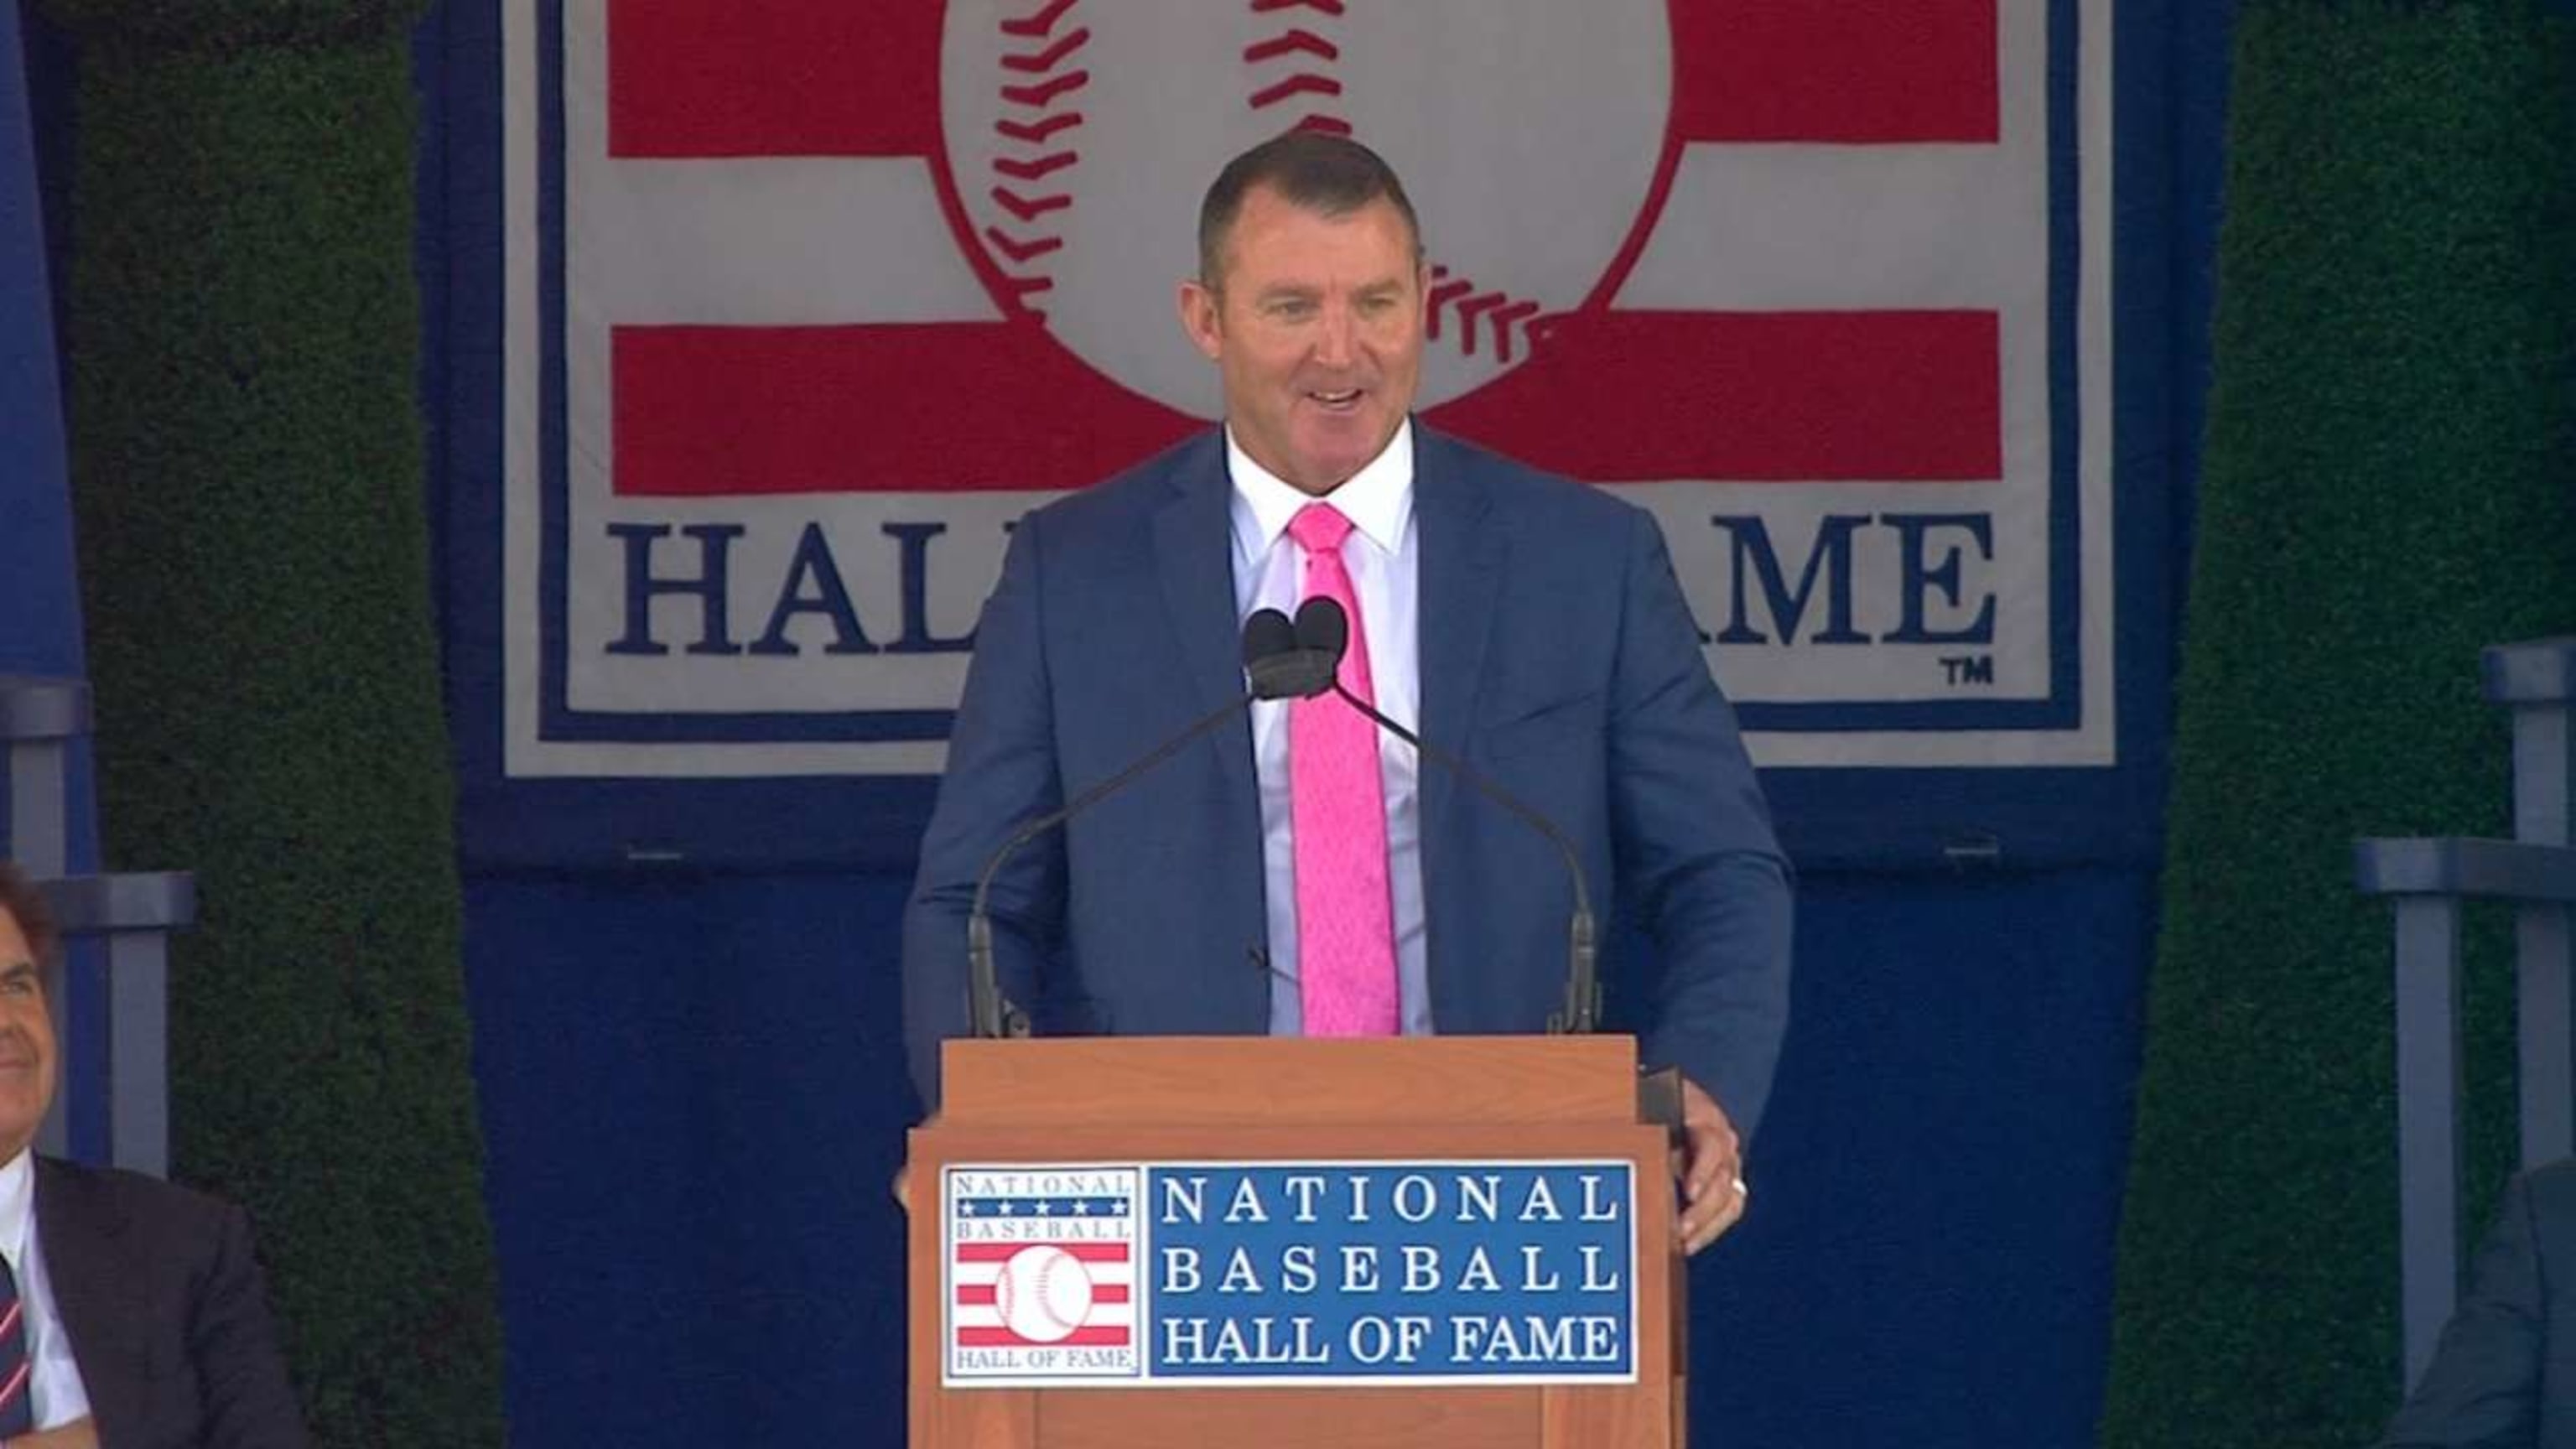 Jim Thome spoke softly and carried a big stick during his HOF